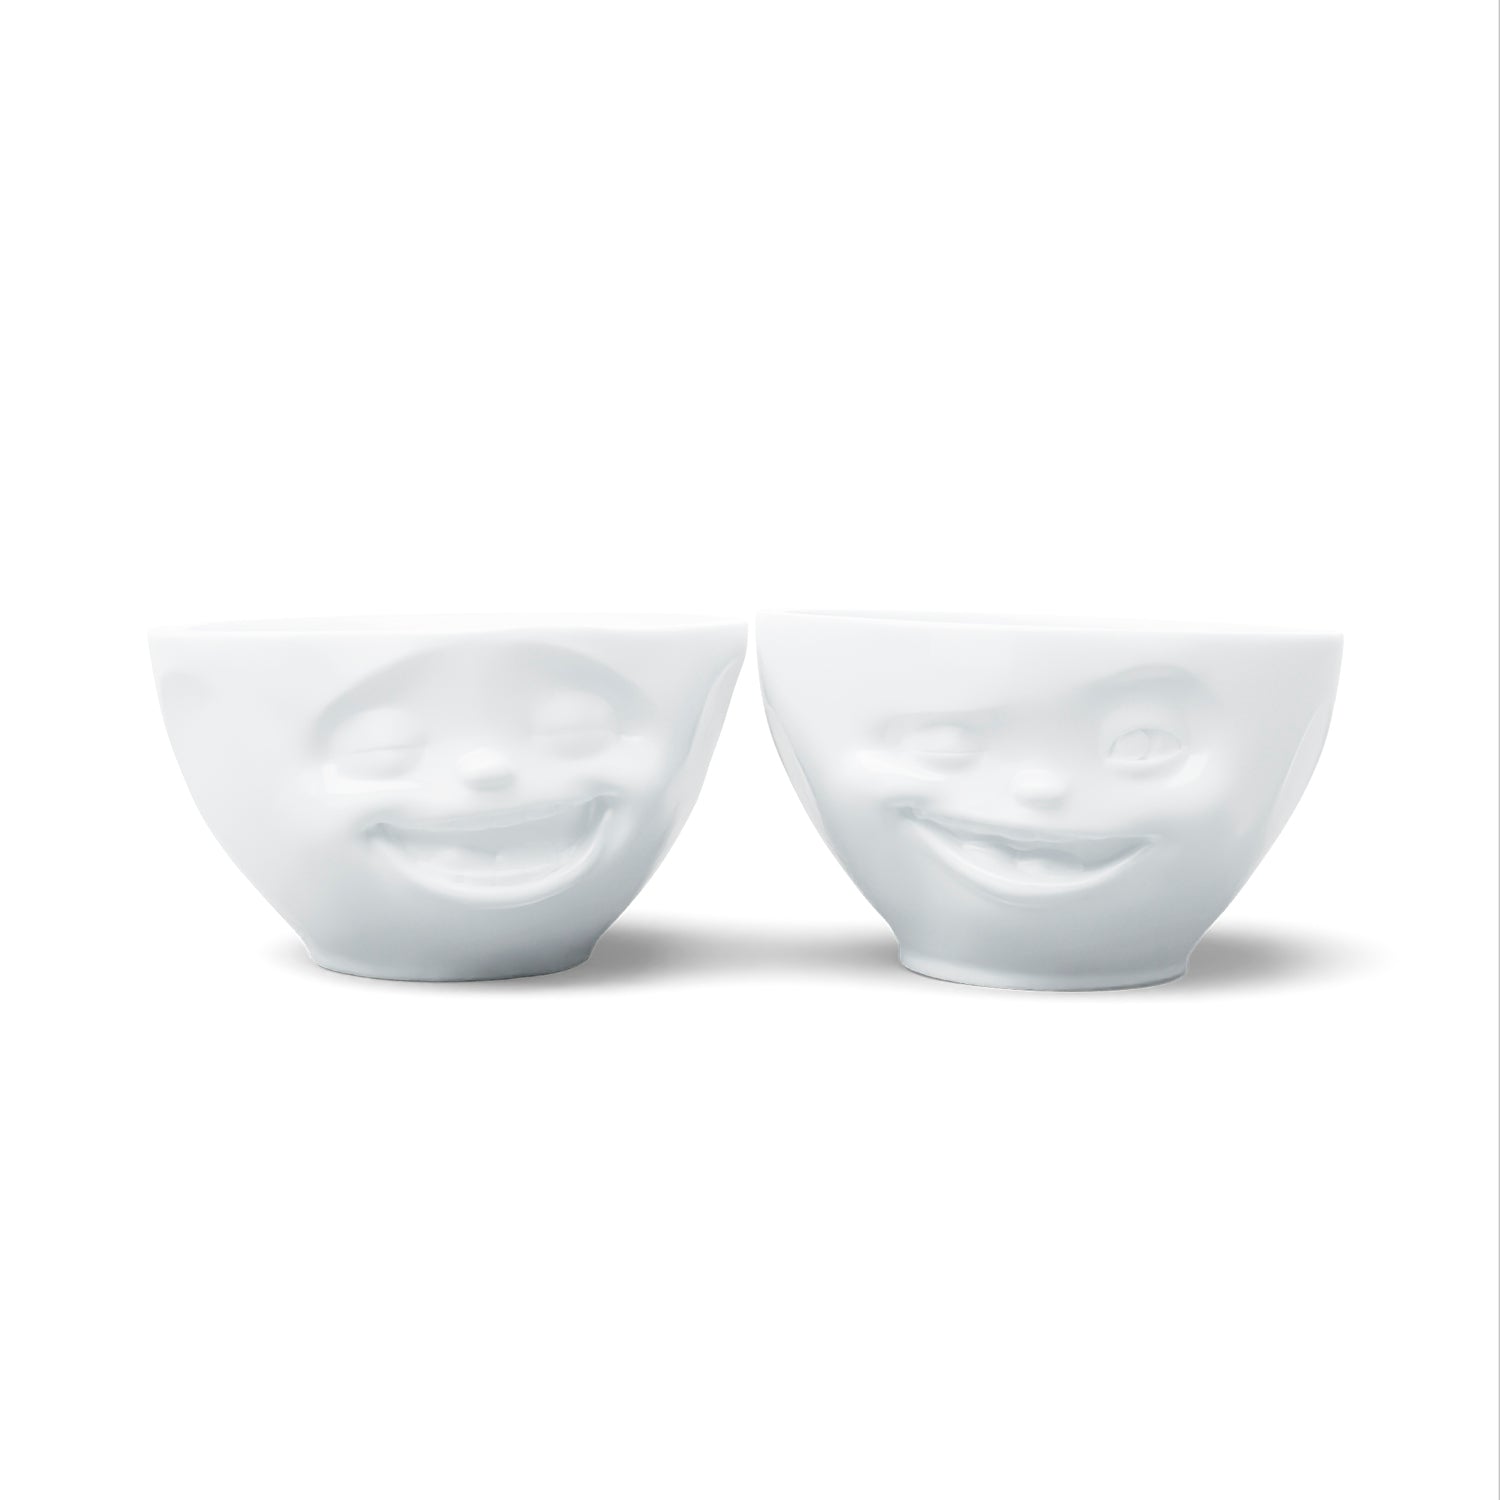 BOWLS MEDIANOS LAUGHING WINKIN